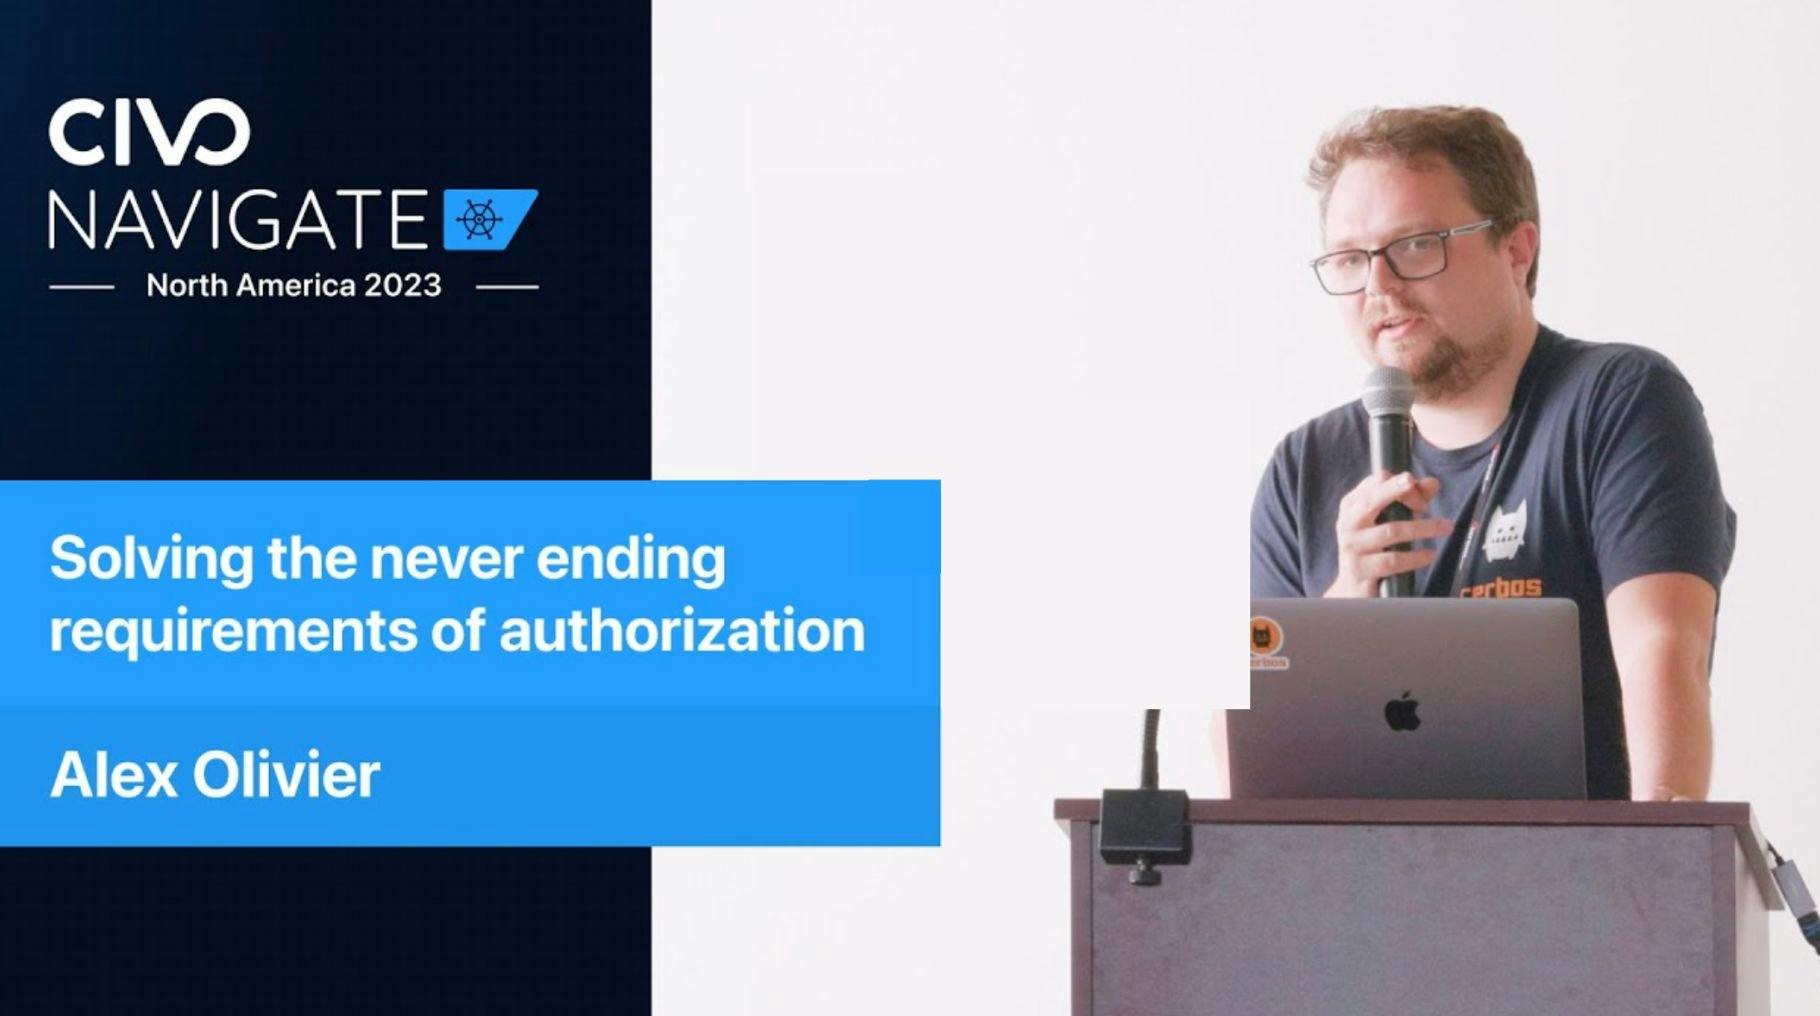 Solving the never ending requirements of authorization | Alex Olivier, Civo Navigate NA 2023